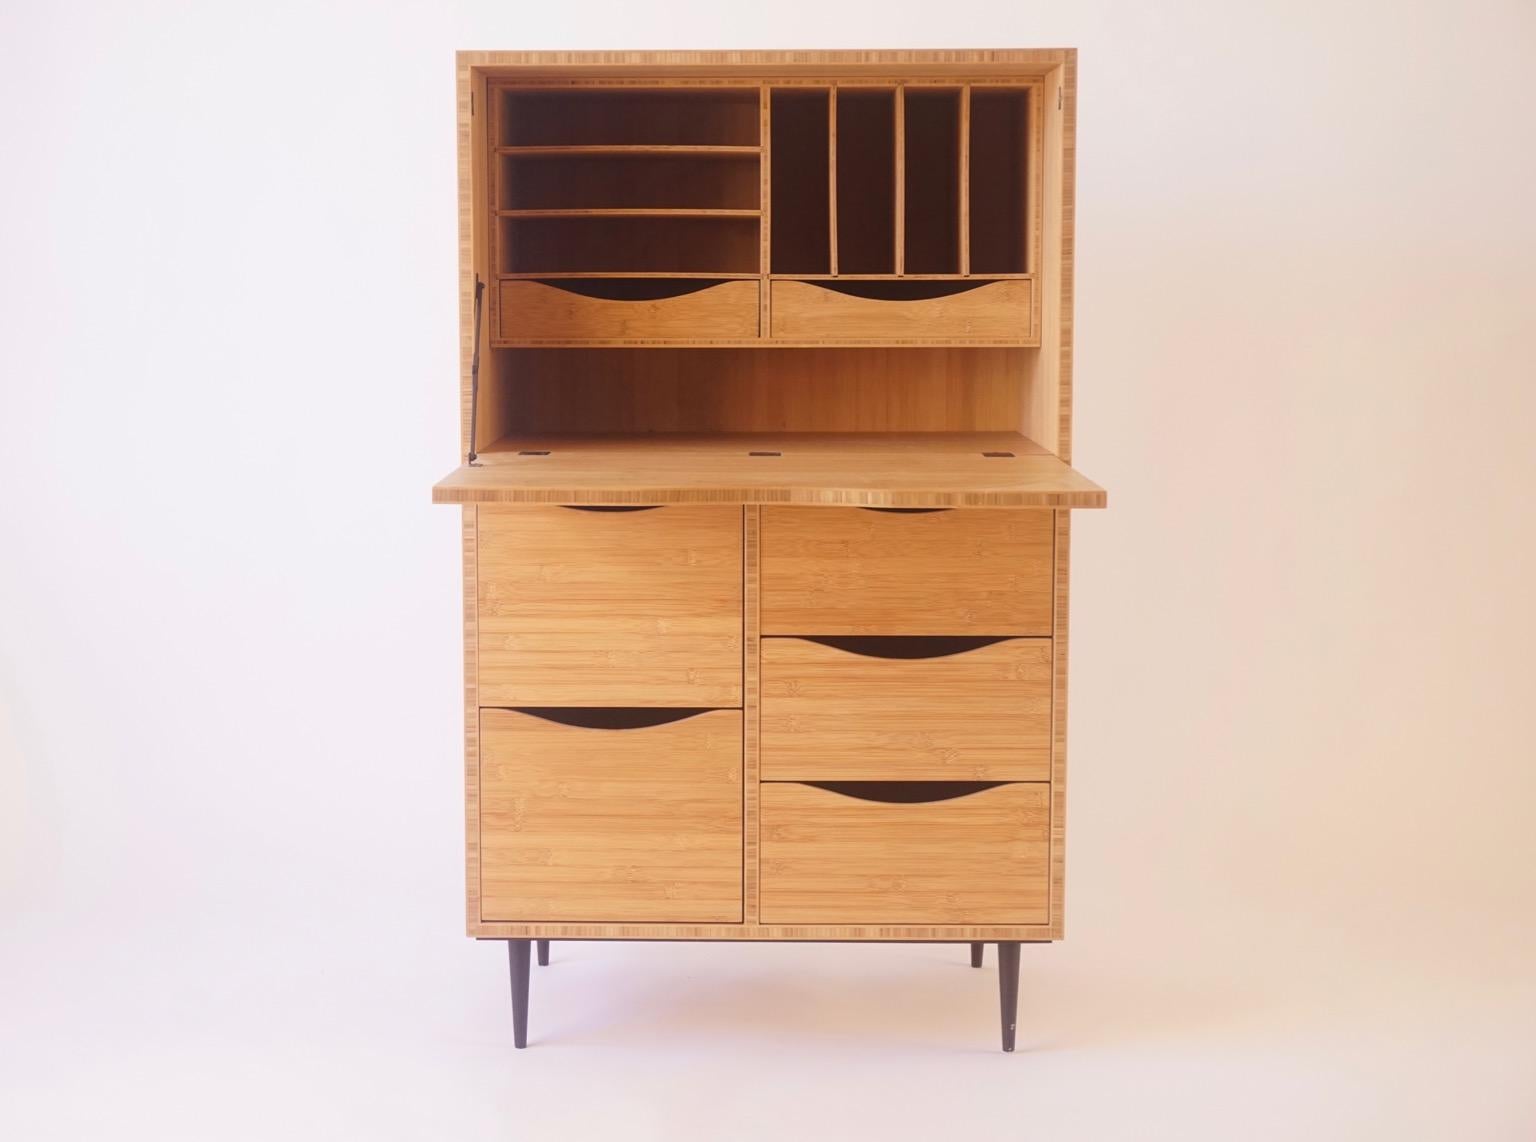 The bamboo secretary is a contemporary take on a traditional cabinet used for letter writing. The beautiful bronze hinges are contrasted with a modern bamboo laminate product for the case, with turned metal legs. All the drawers run on bamboo slats